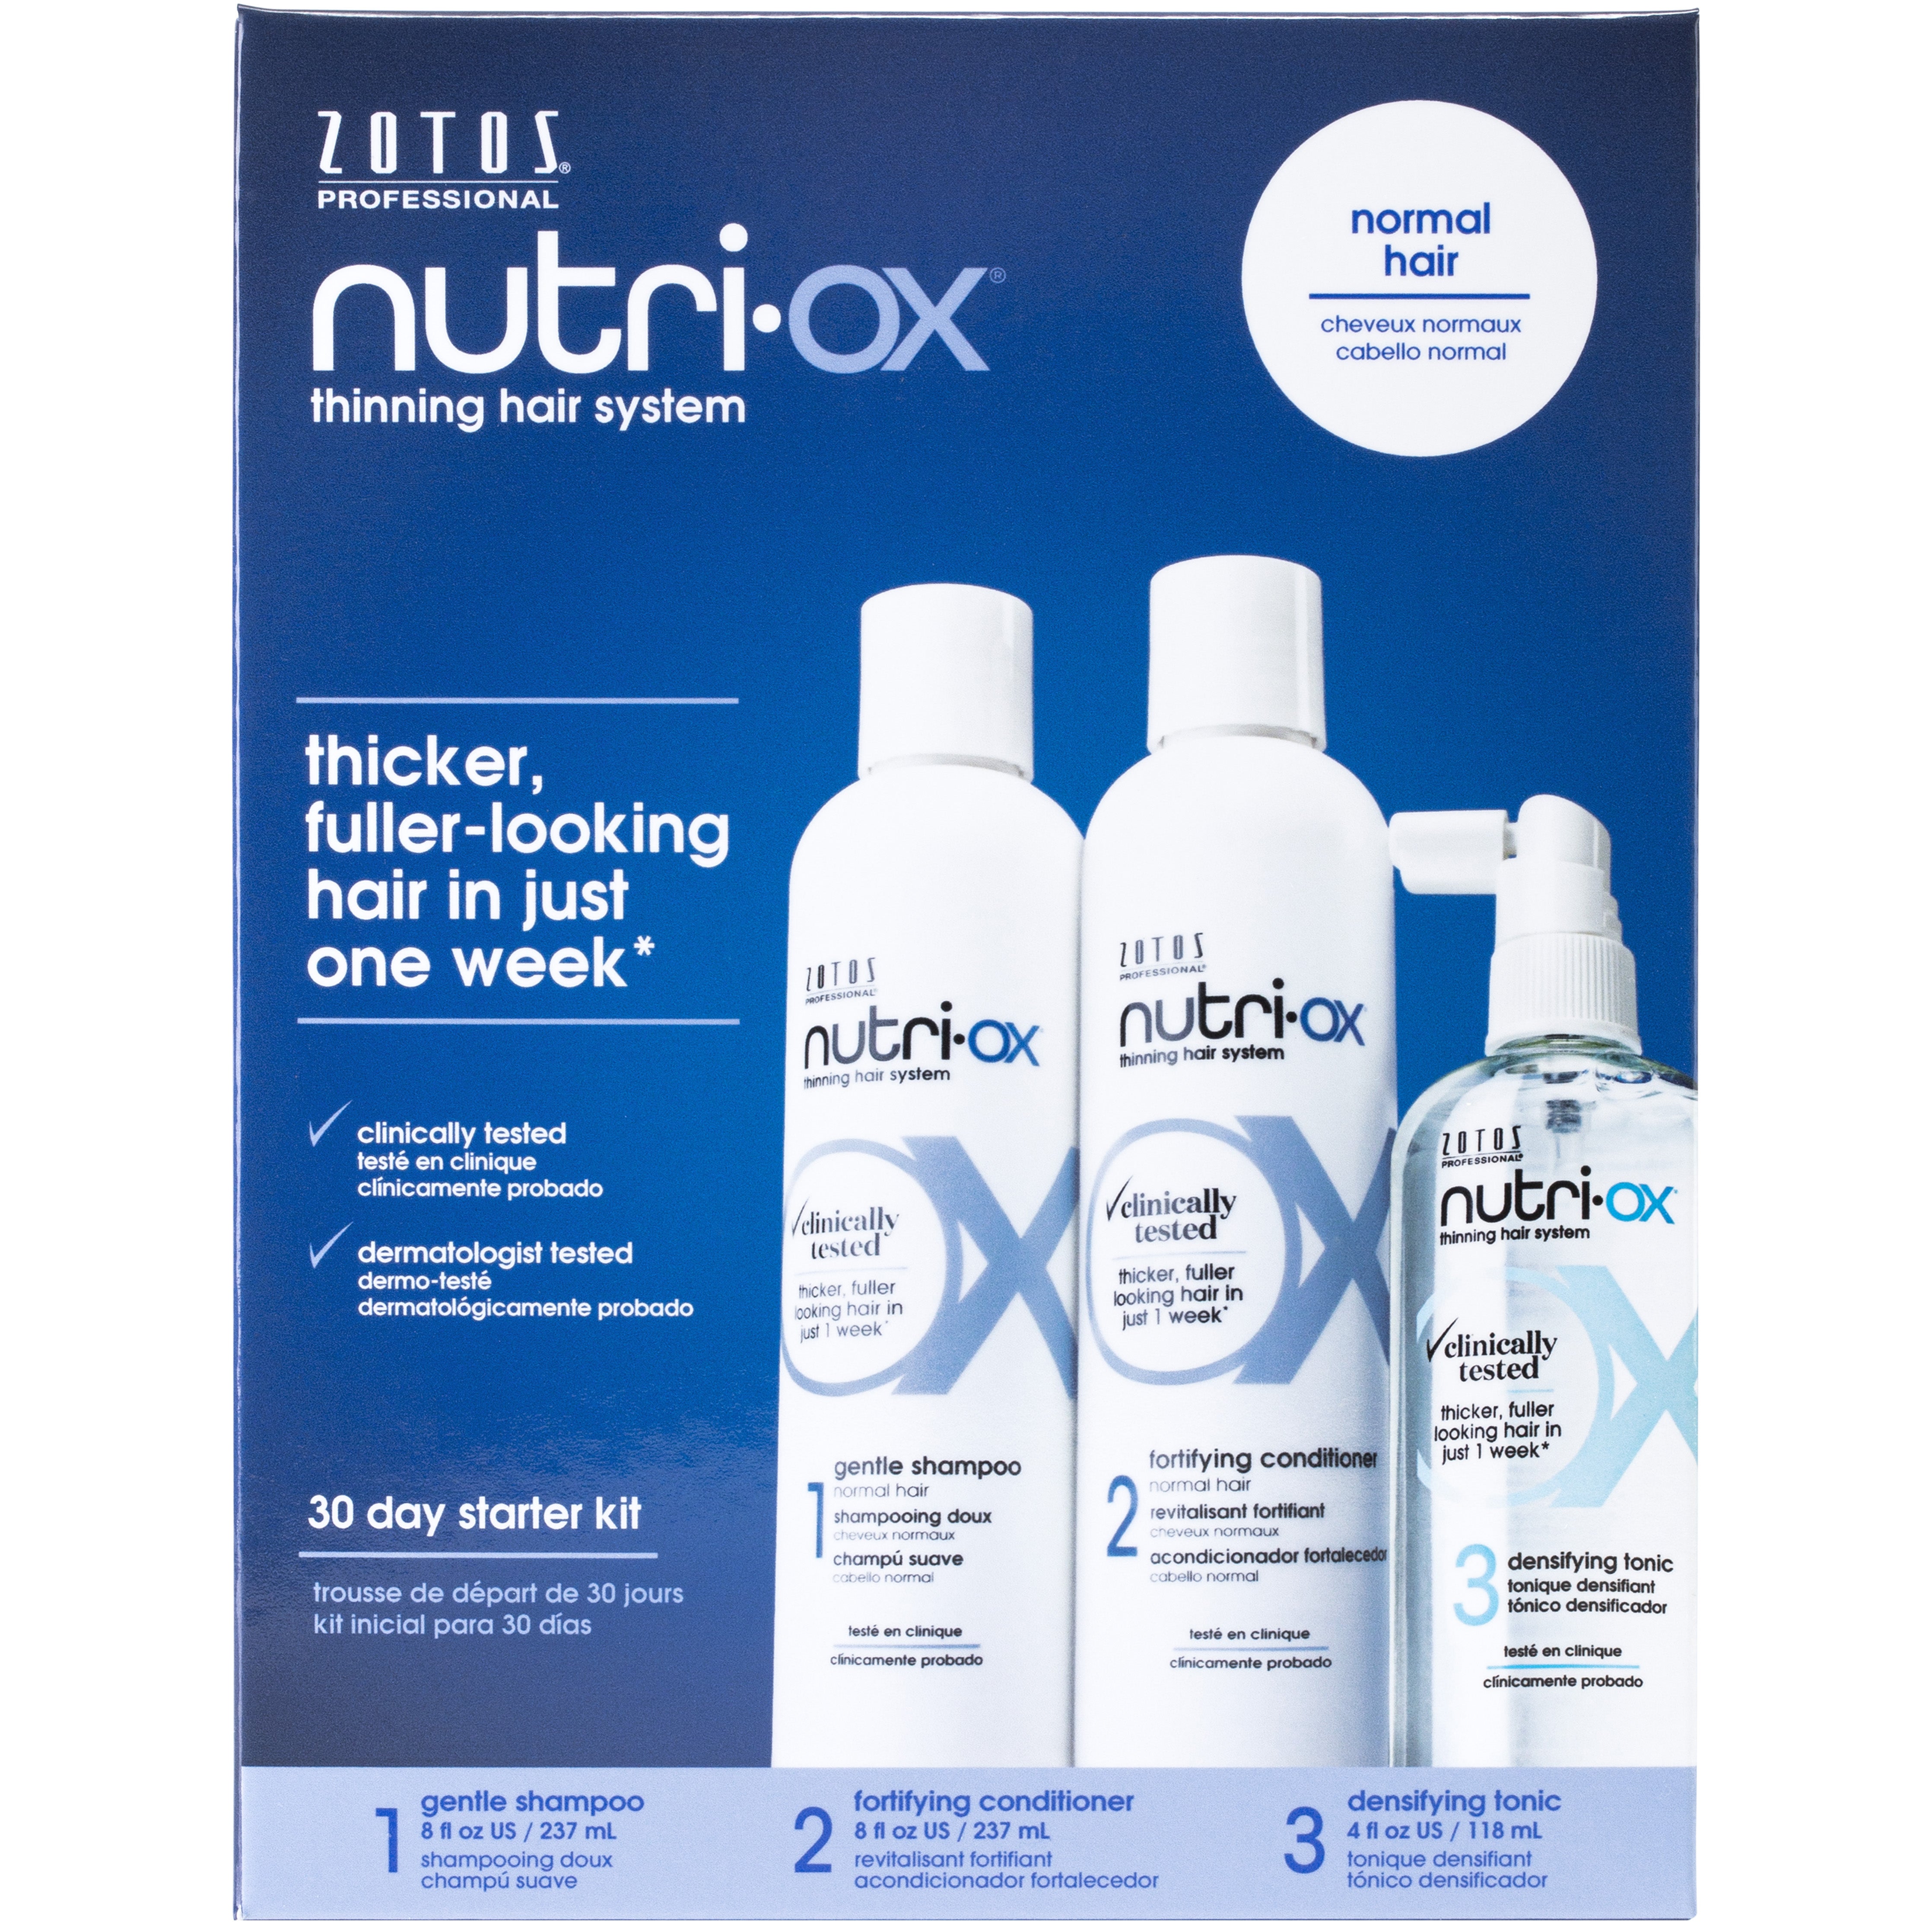 Nutri-Ox Thinning Hair System for normal hair, including: Gentle shampoo, fortifying conditioner, and densifying tonic